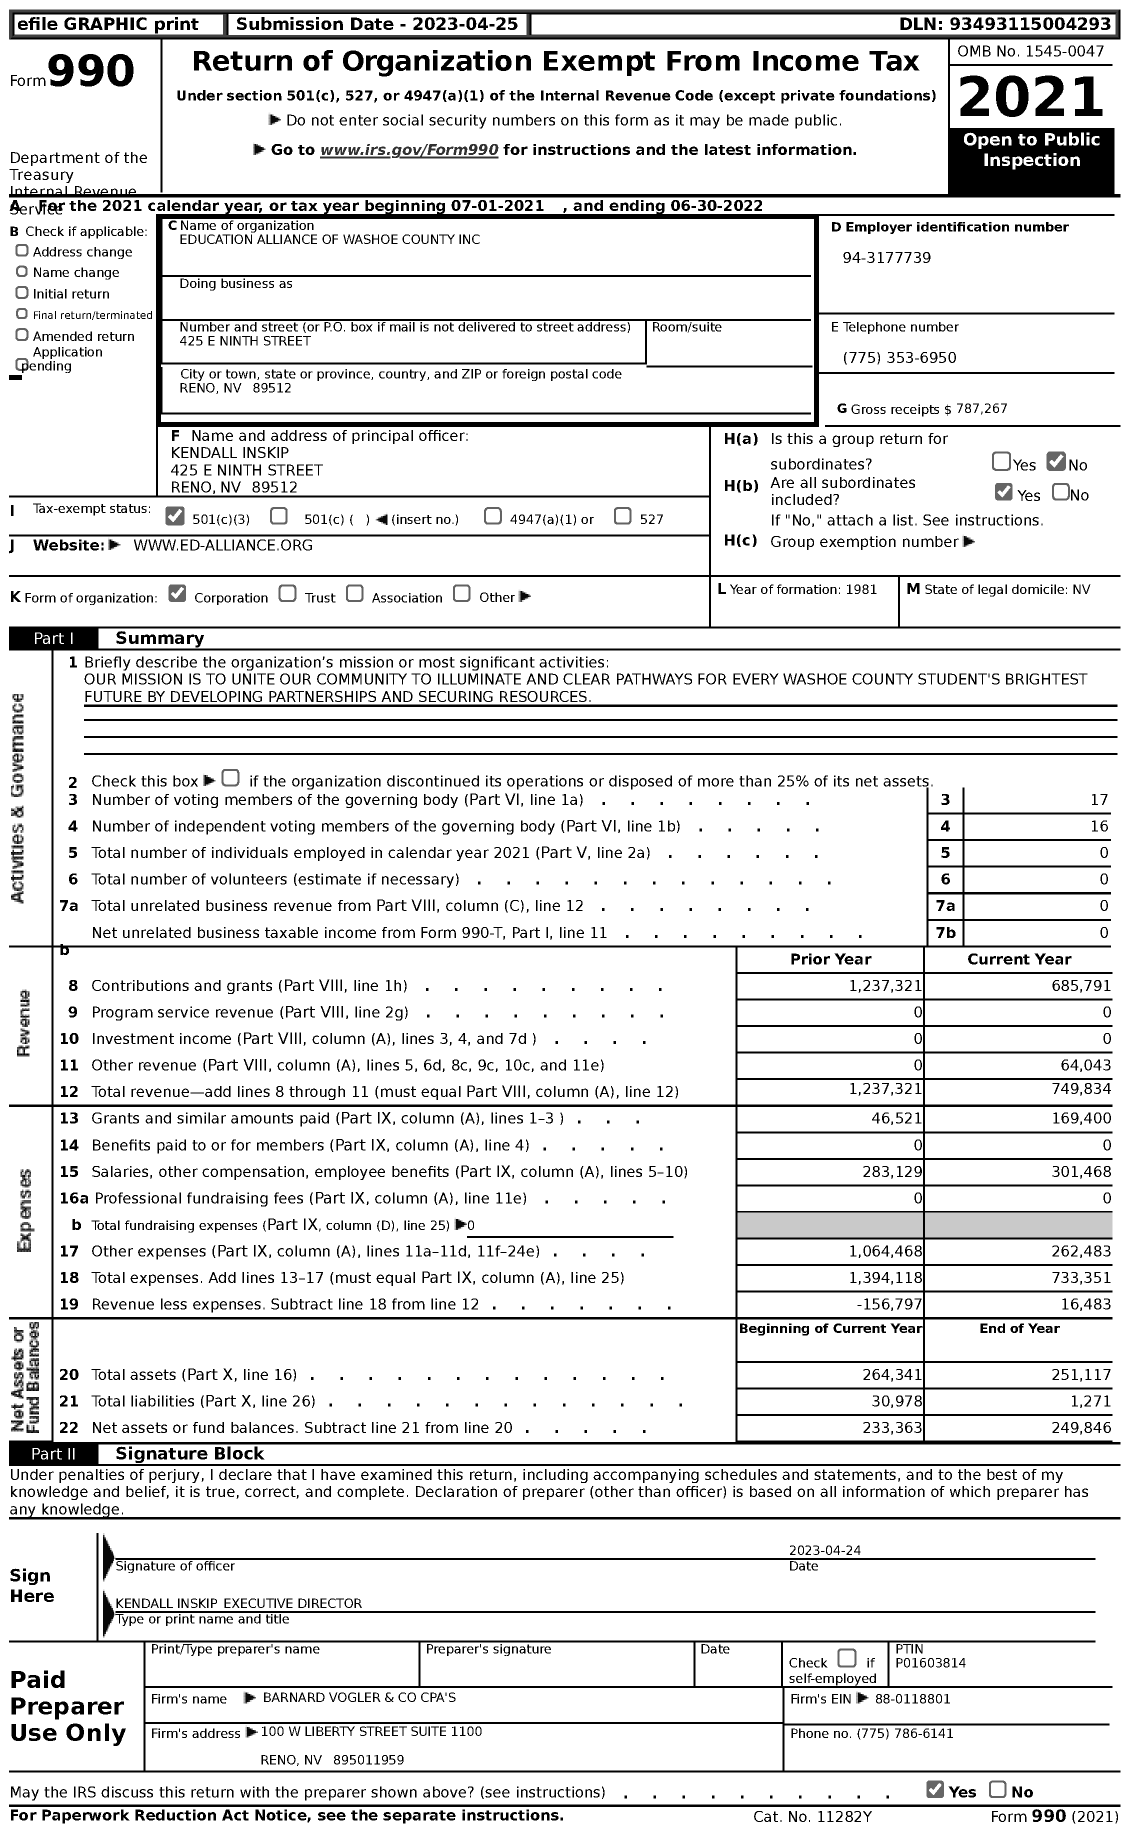 Image of first page of 2021 Form 990 for Education Alliance of Washoe County